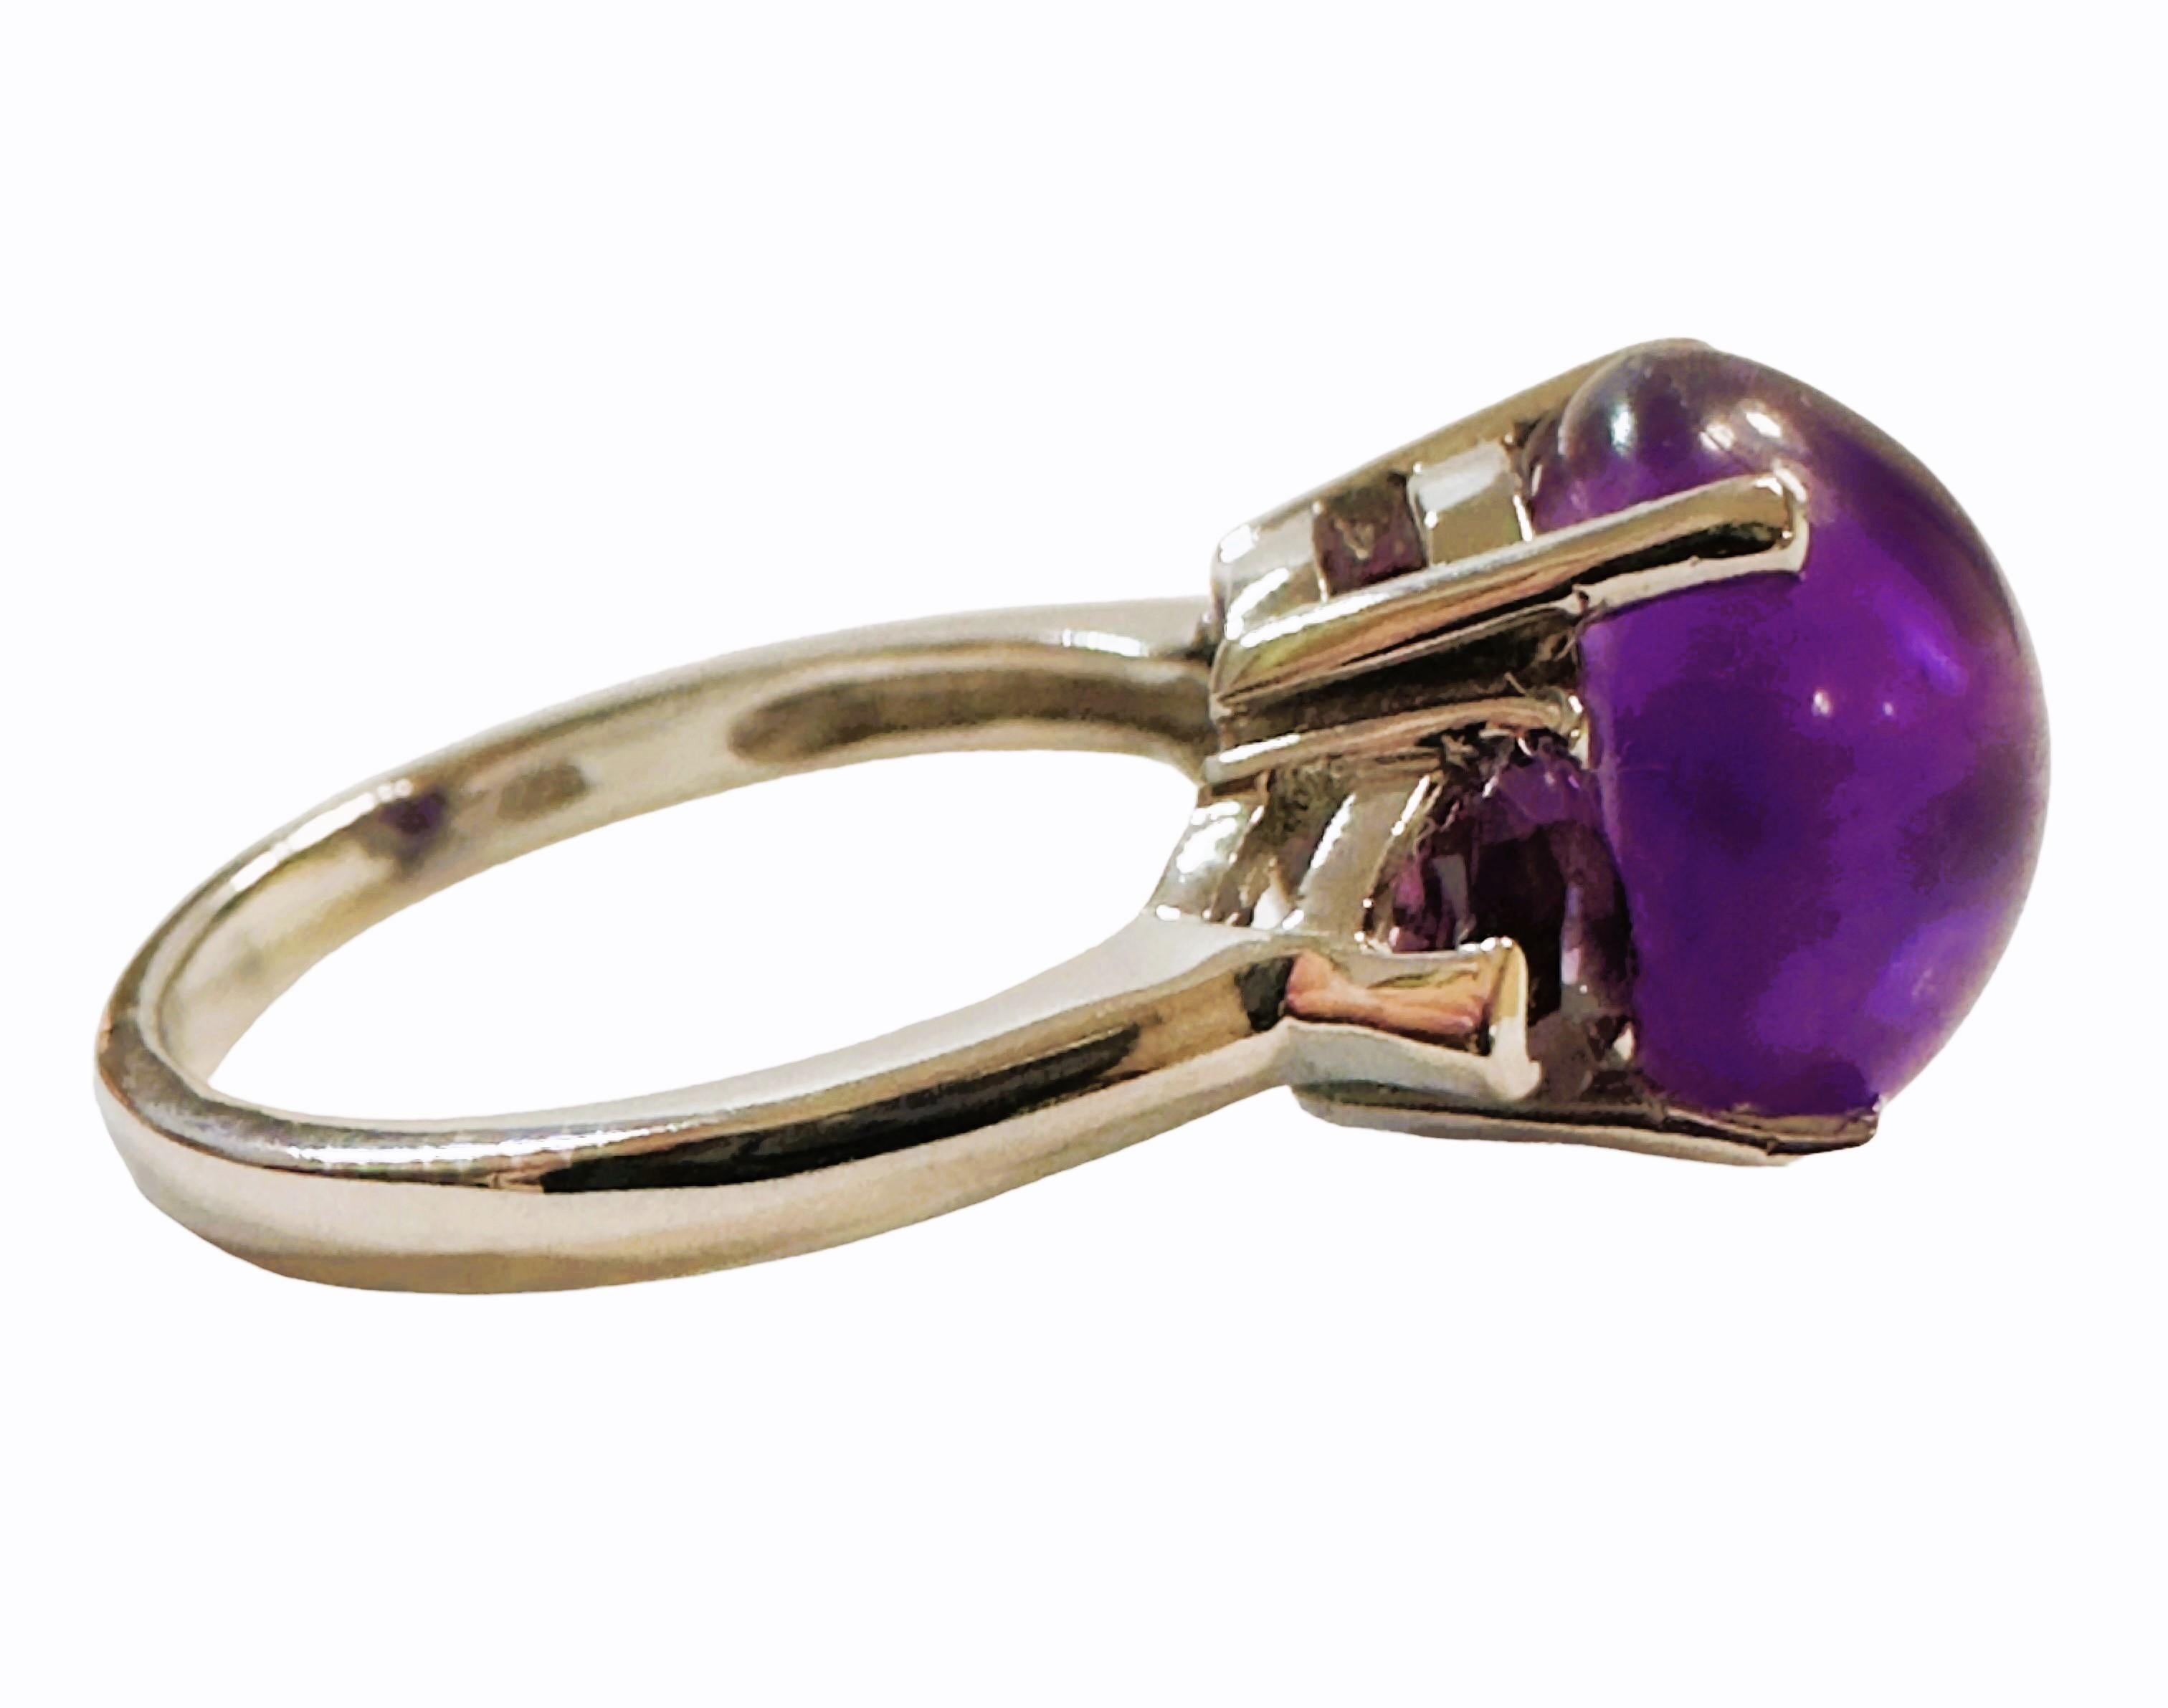 Women's New Brazilian 7.3 Ct Cabochon & Trillion Cut Amethyst Sterling Ring Size 7 For Sale